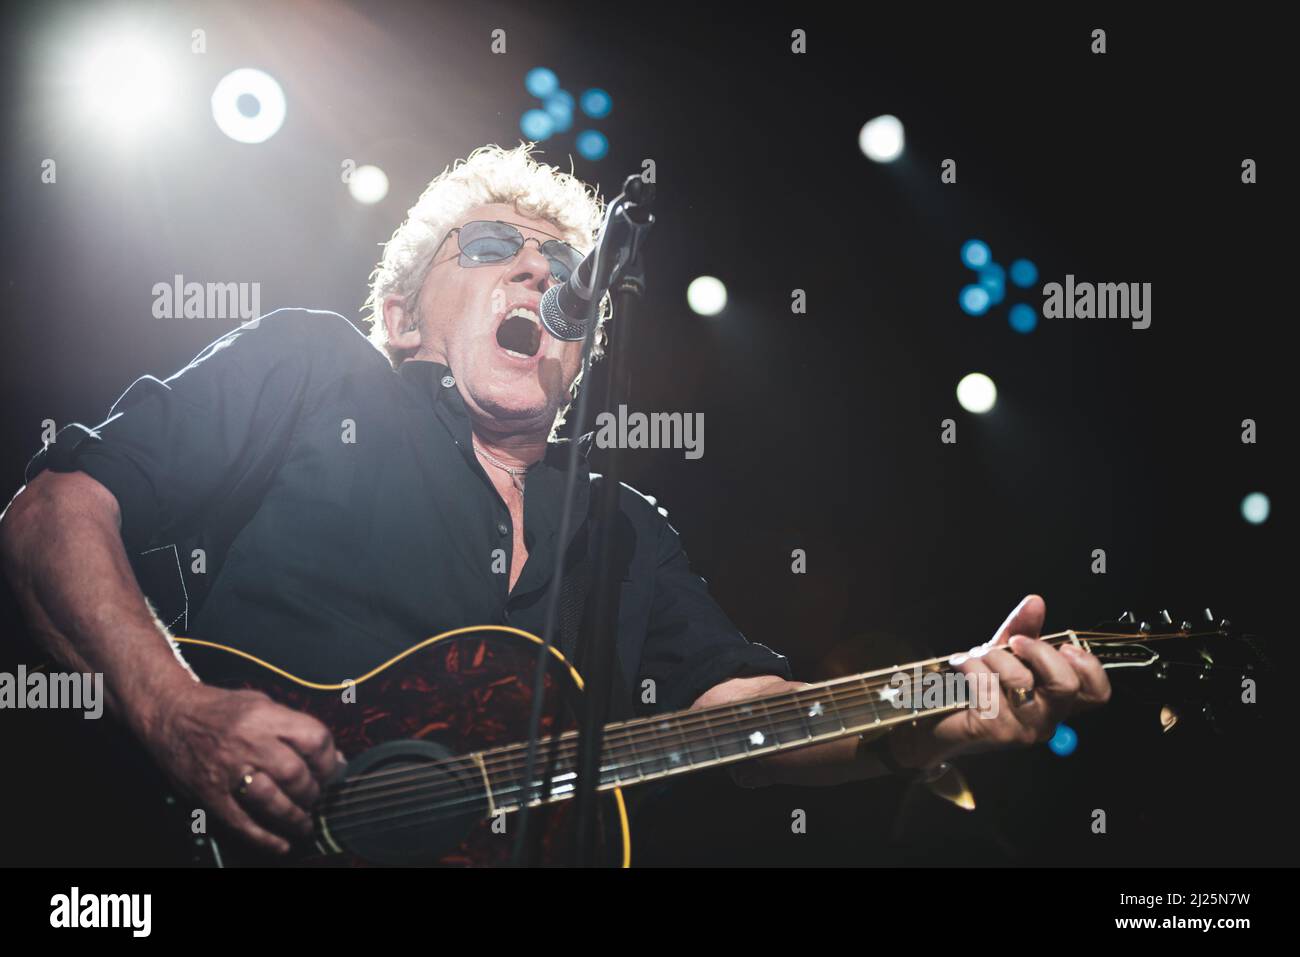 ITALY, BOLOGNA, UNIPOL ARENA 2016: Roger Daltrey, singer of the British rock band “The Who”, performing live on stage for the “Back to the Who” European tour Stock Photo